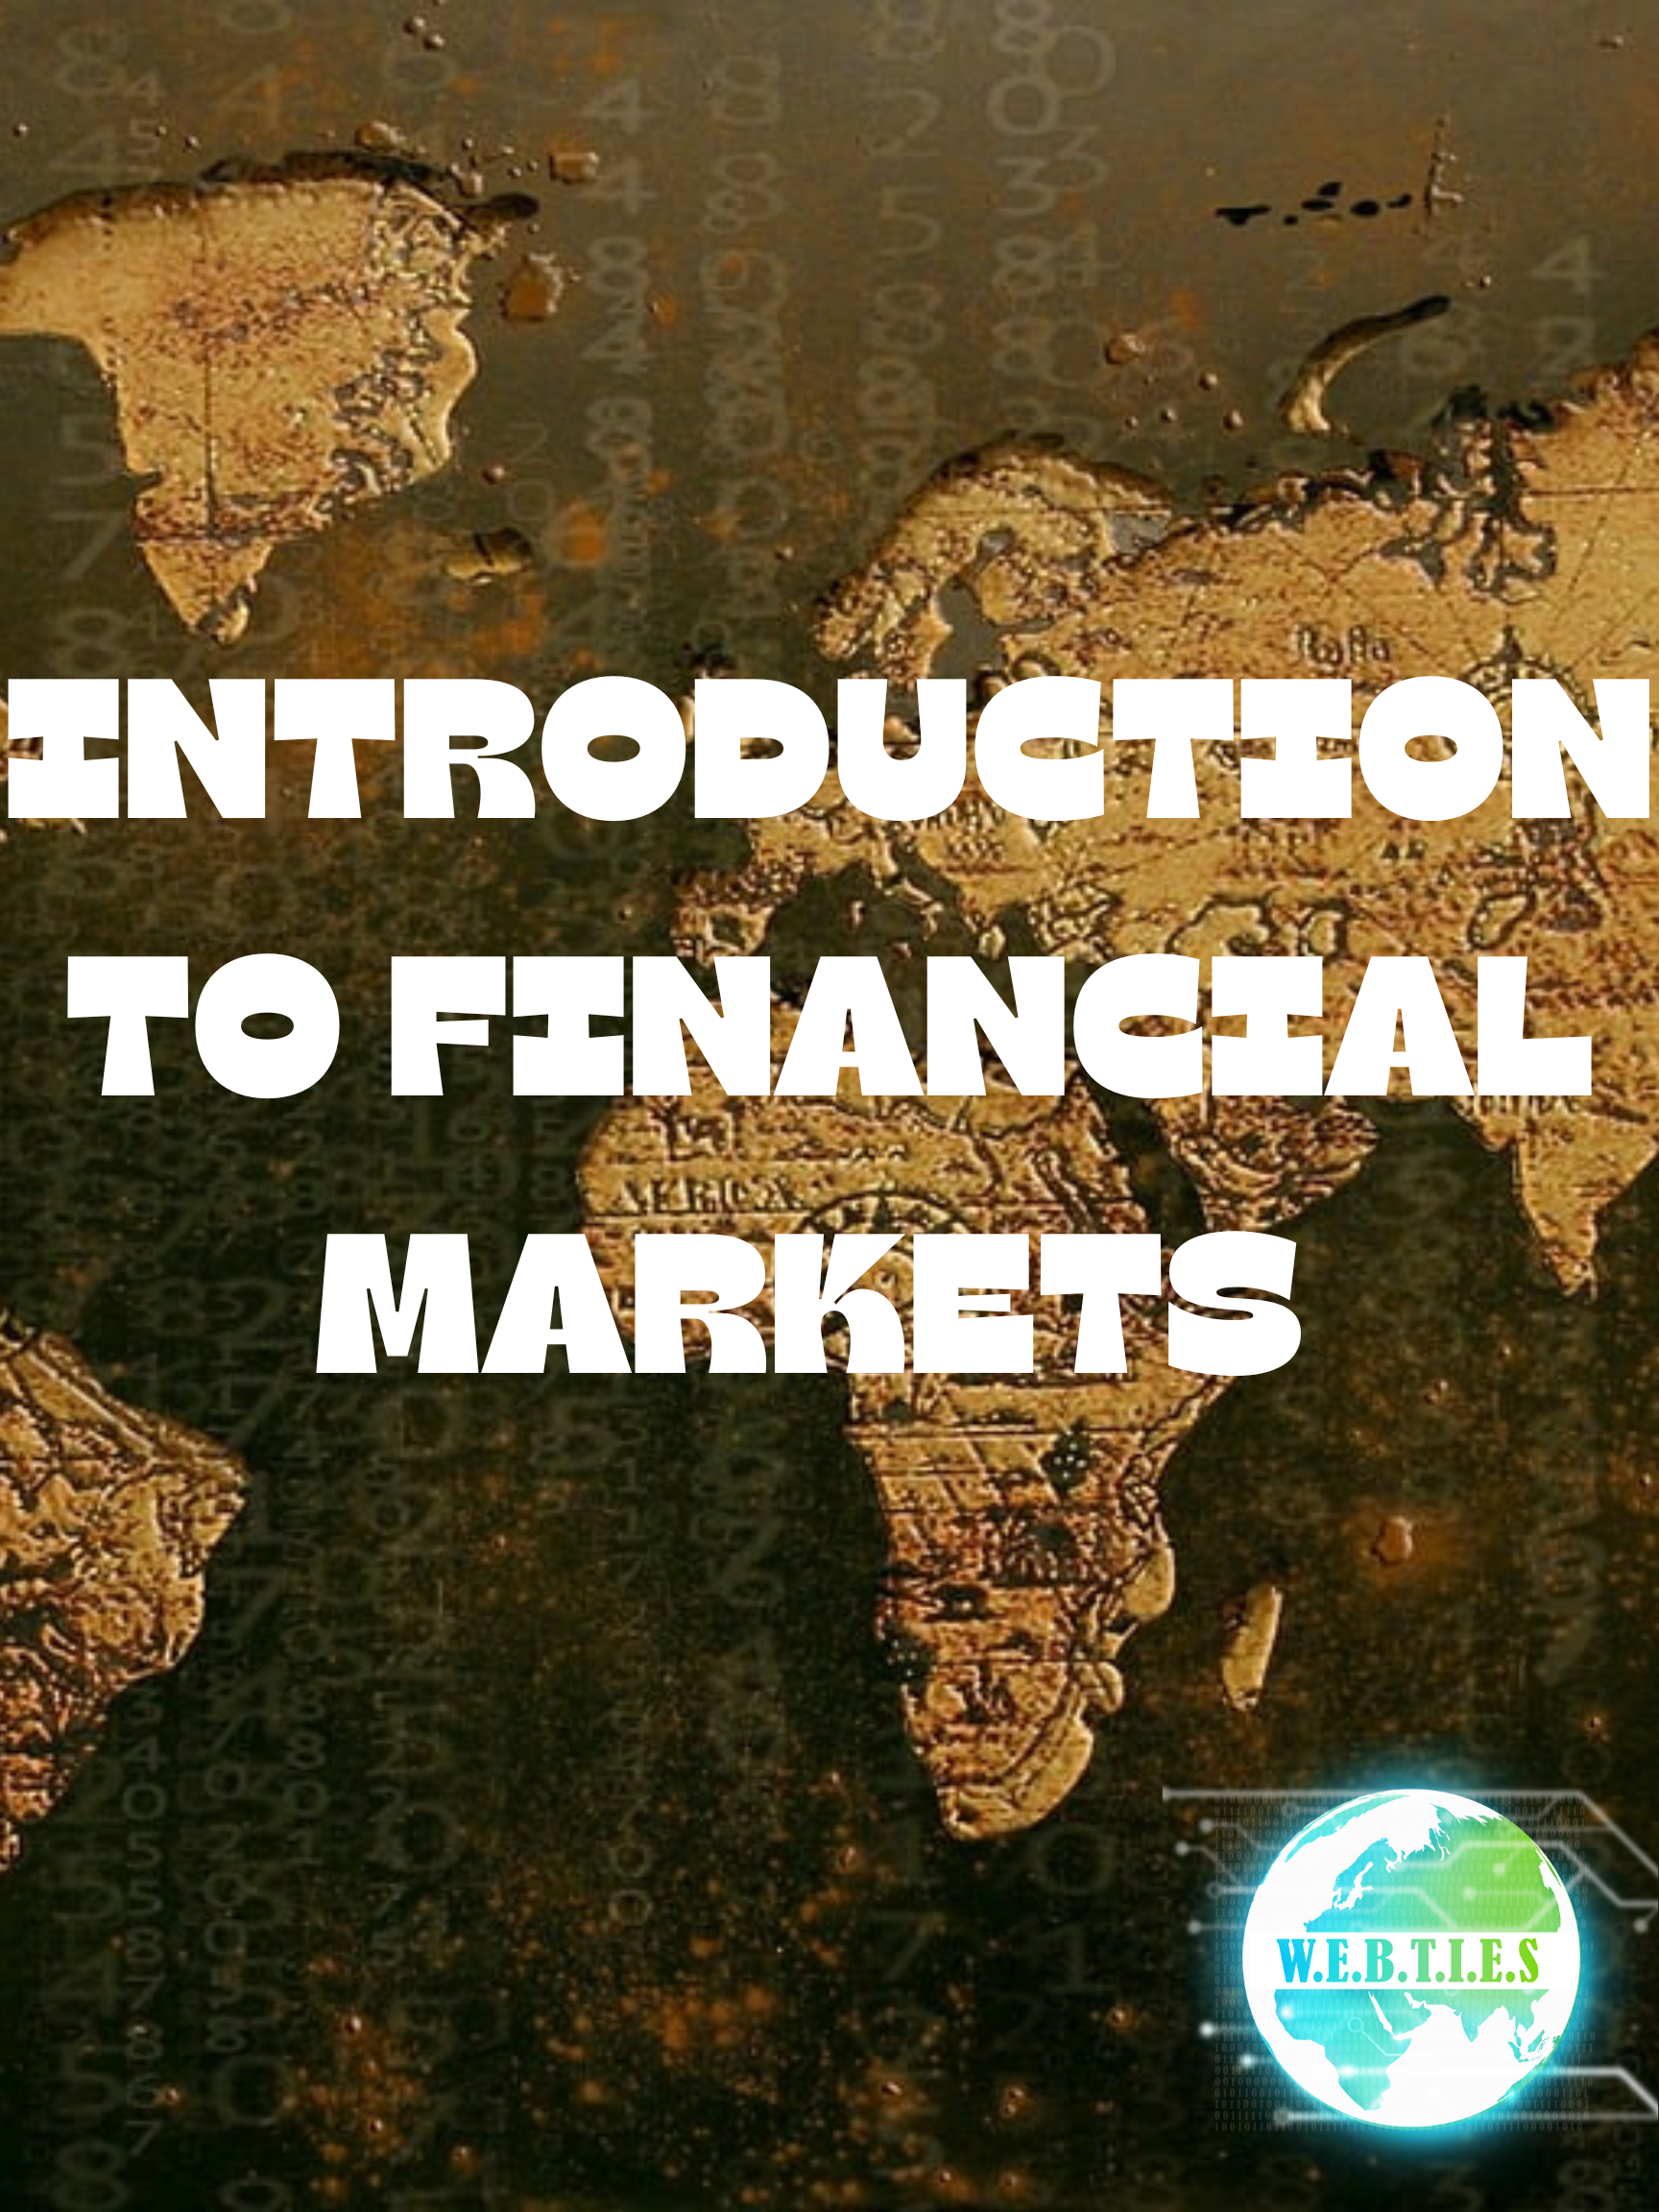 INTRO TO FINANCIAL MARKETS